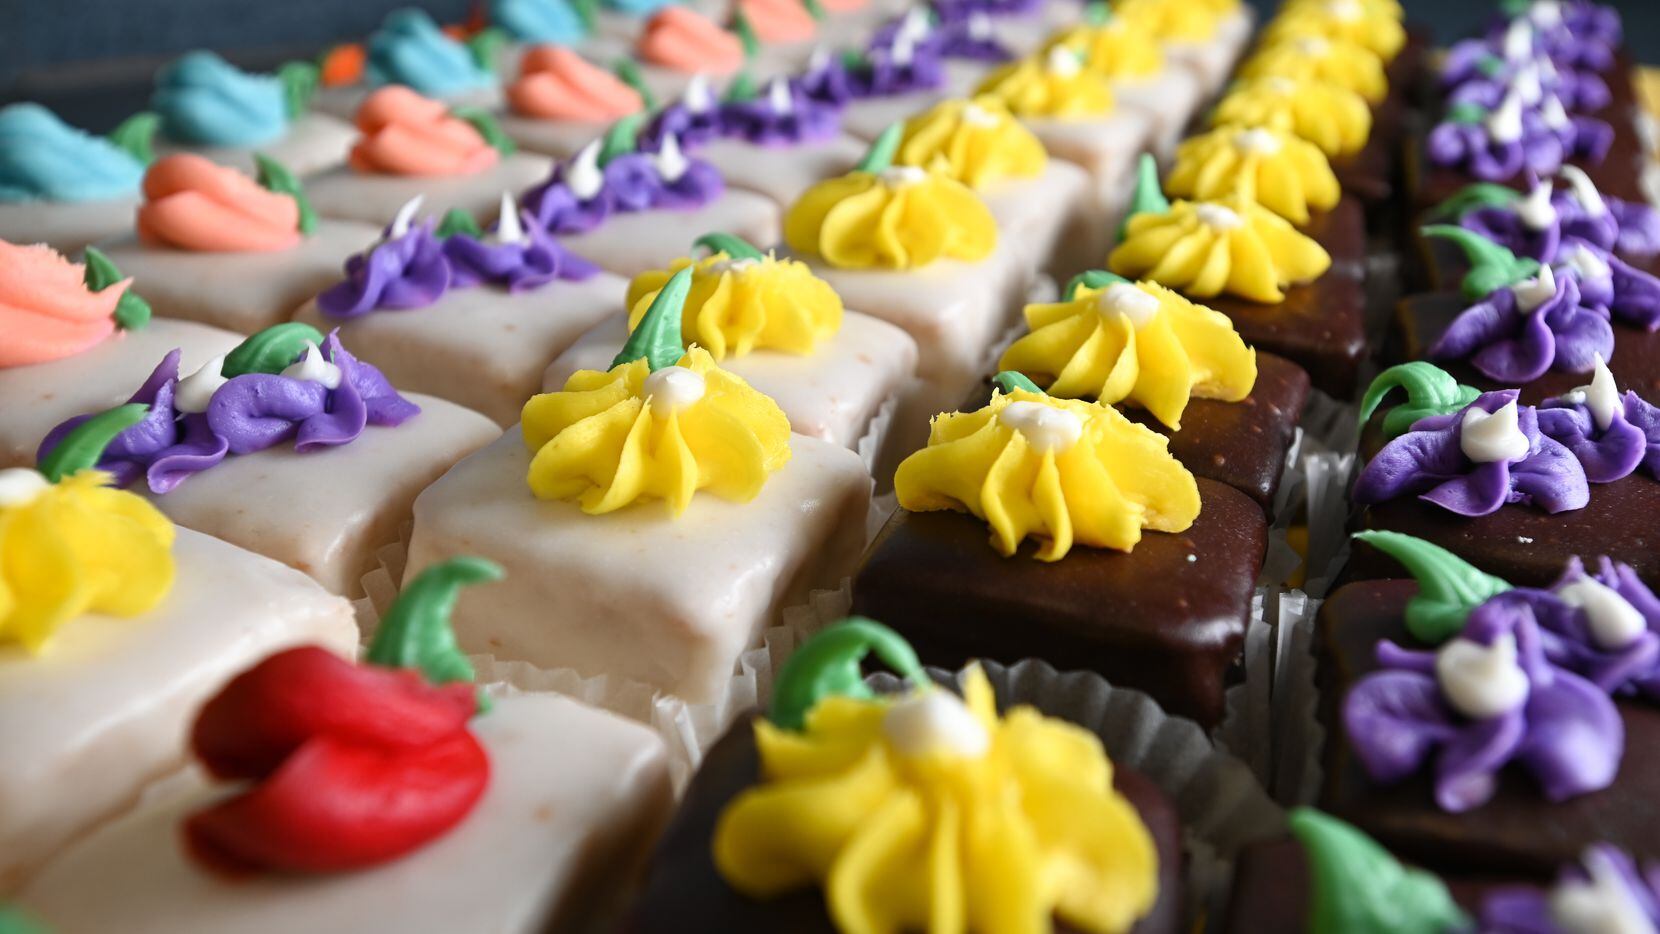 Stein's Bakery has used the same petit fours recipe for about 80 years.